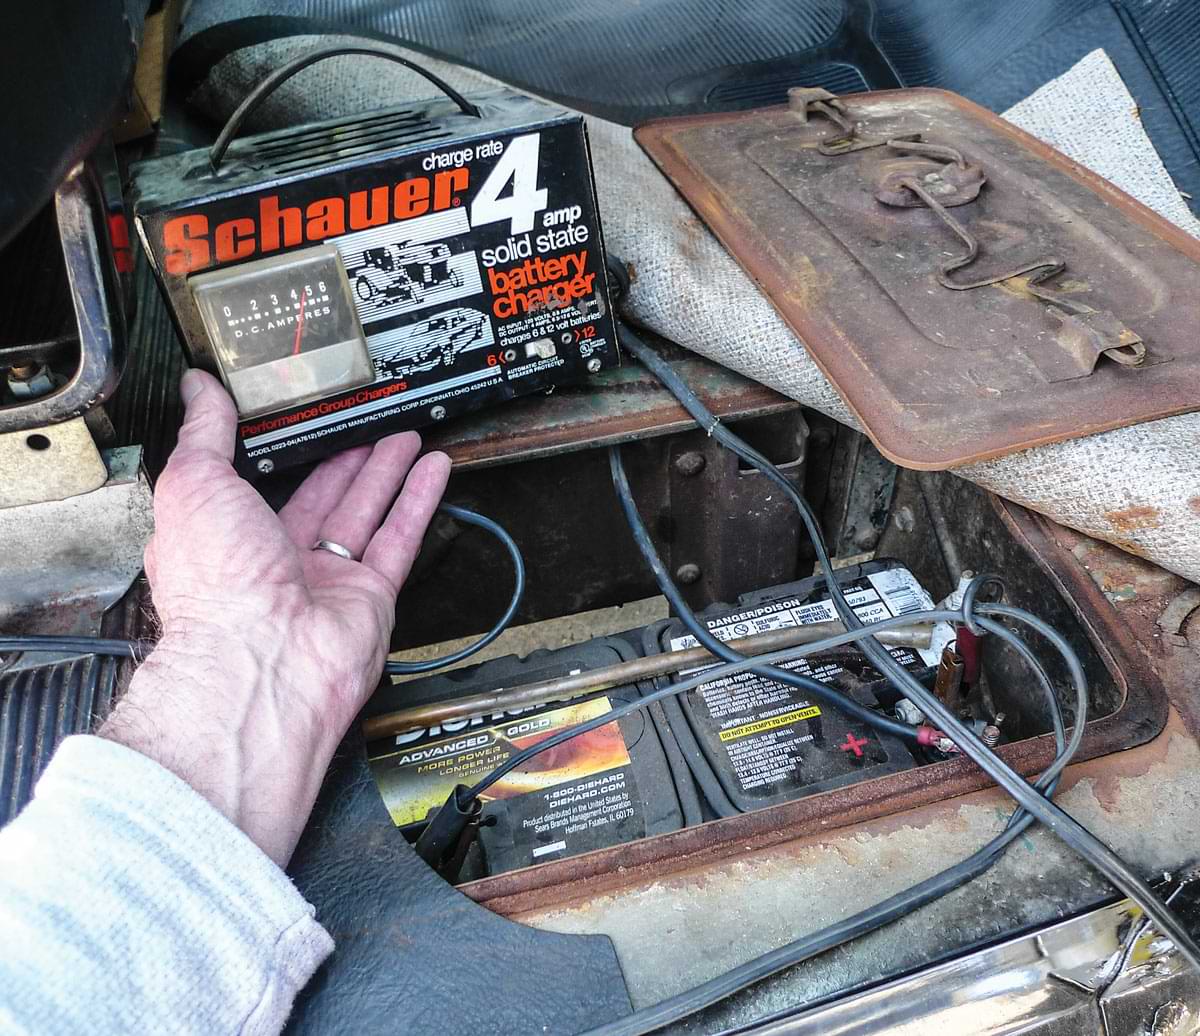 7. This dead DieHard battery was likely a used one from the wrecking yard